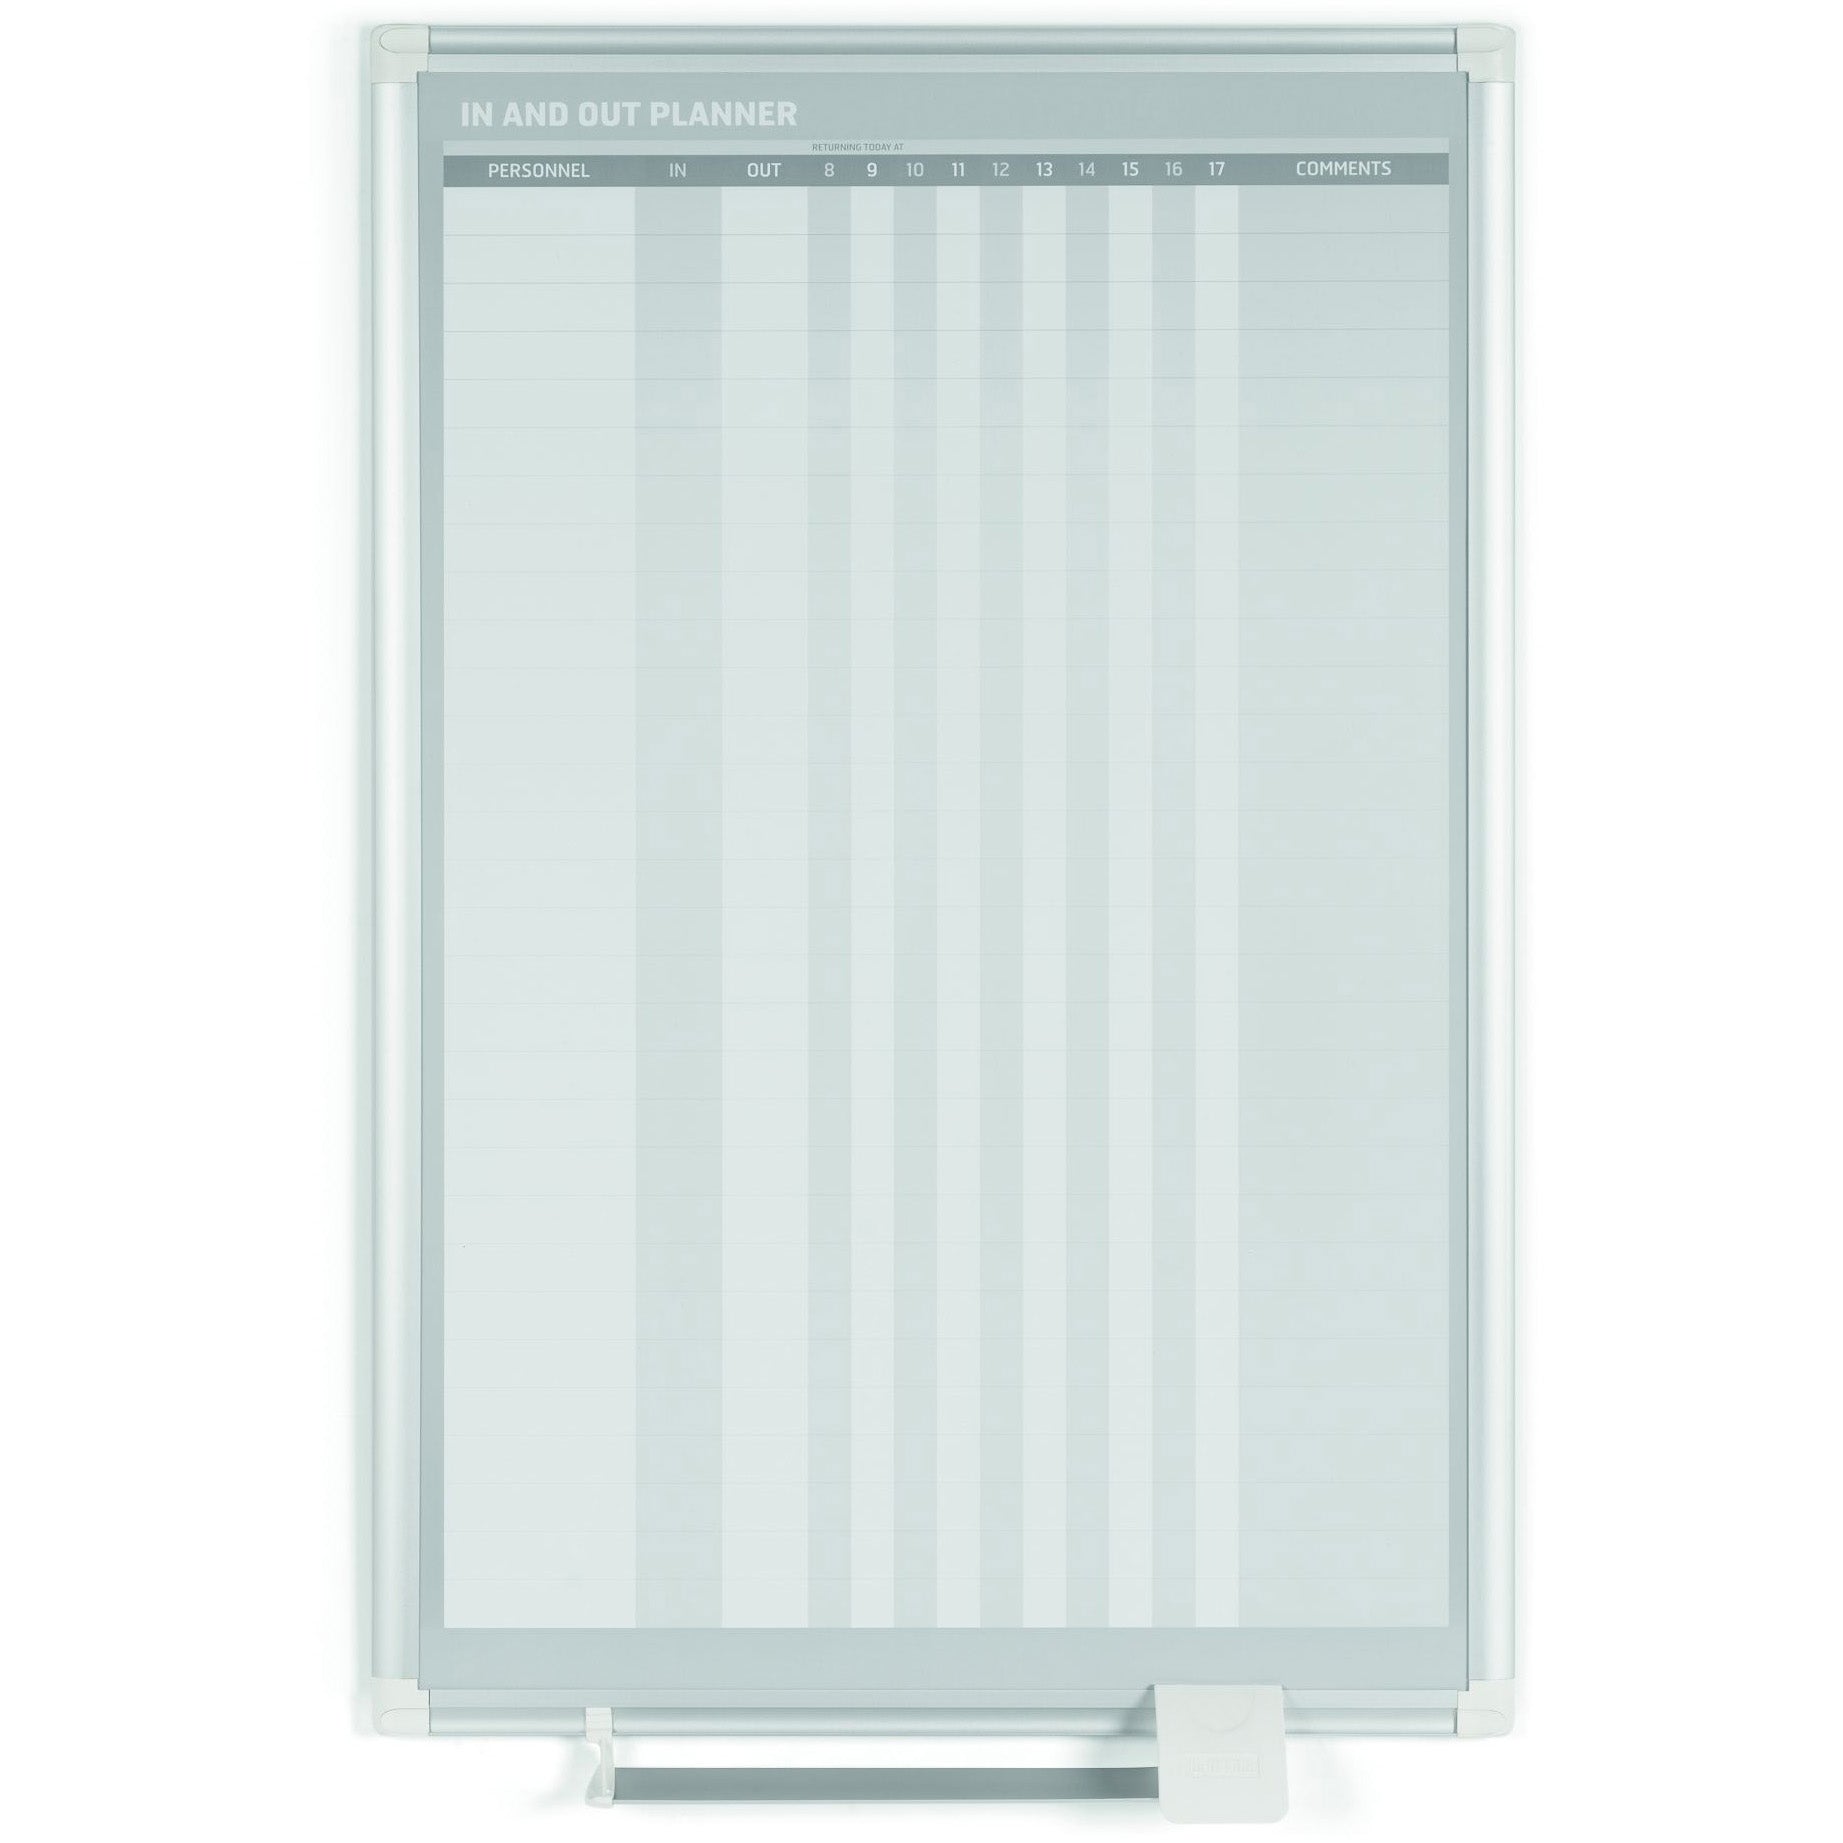 GA02109830 Vertical In/Out Dry Erase Magnetic White Board Planner, Wall Mounting, Sliding Marker Tray, 36" x 24", Aluminum Frame by MasterVision